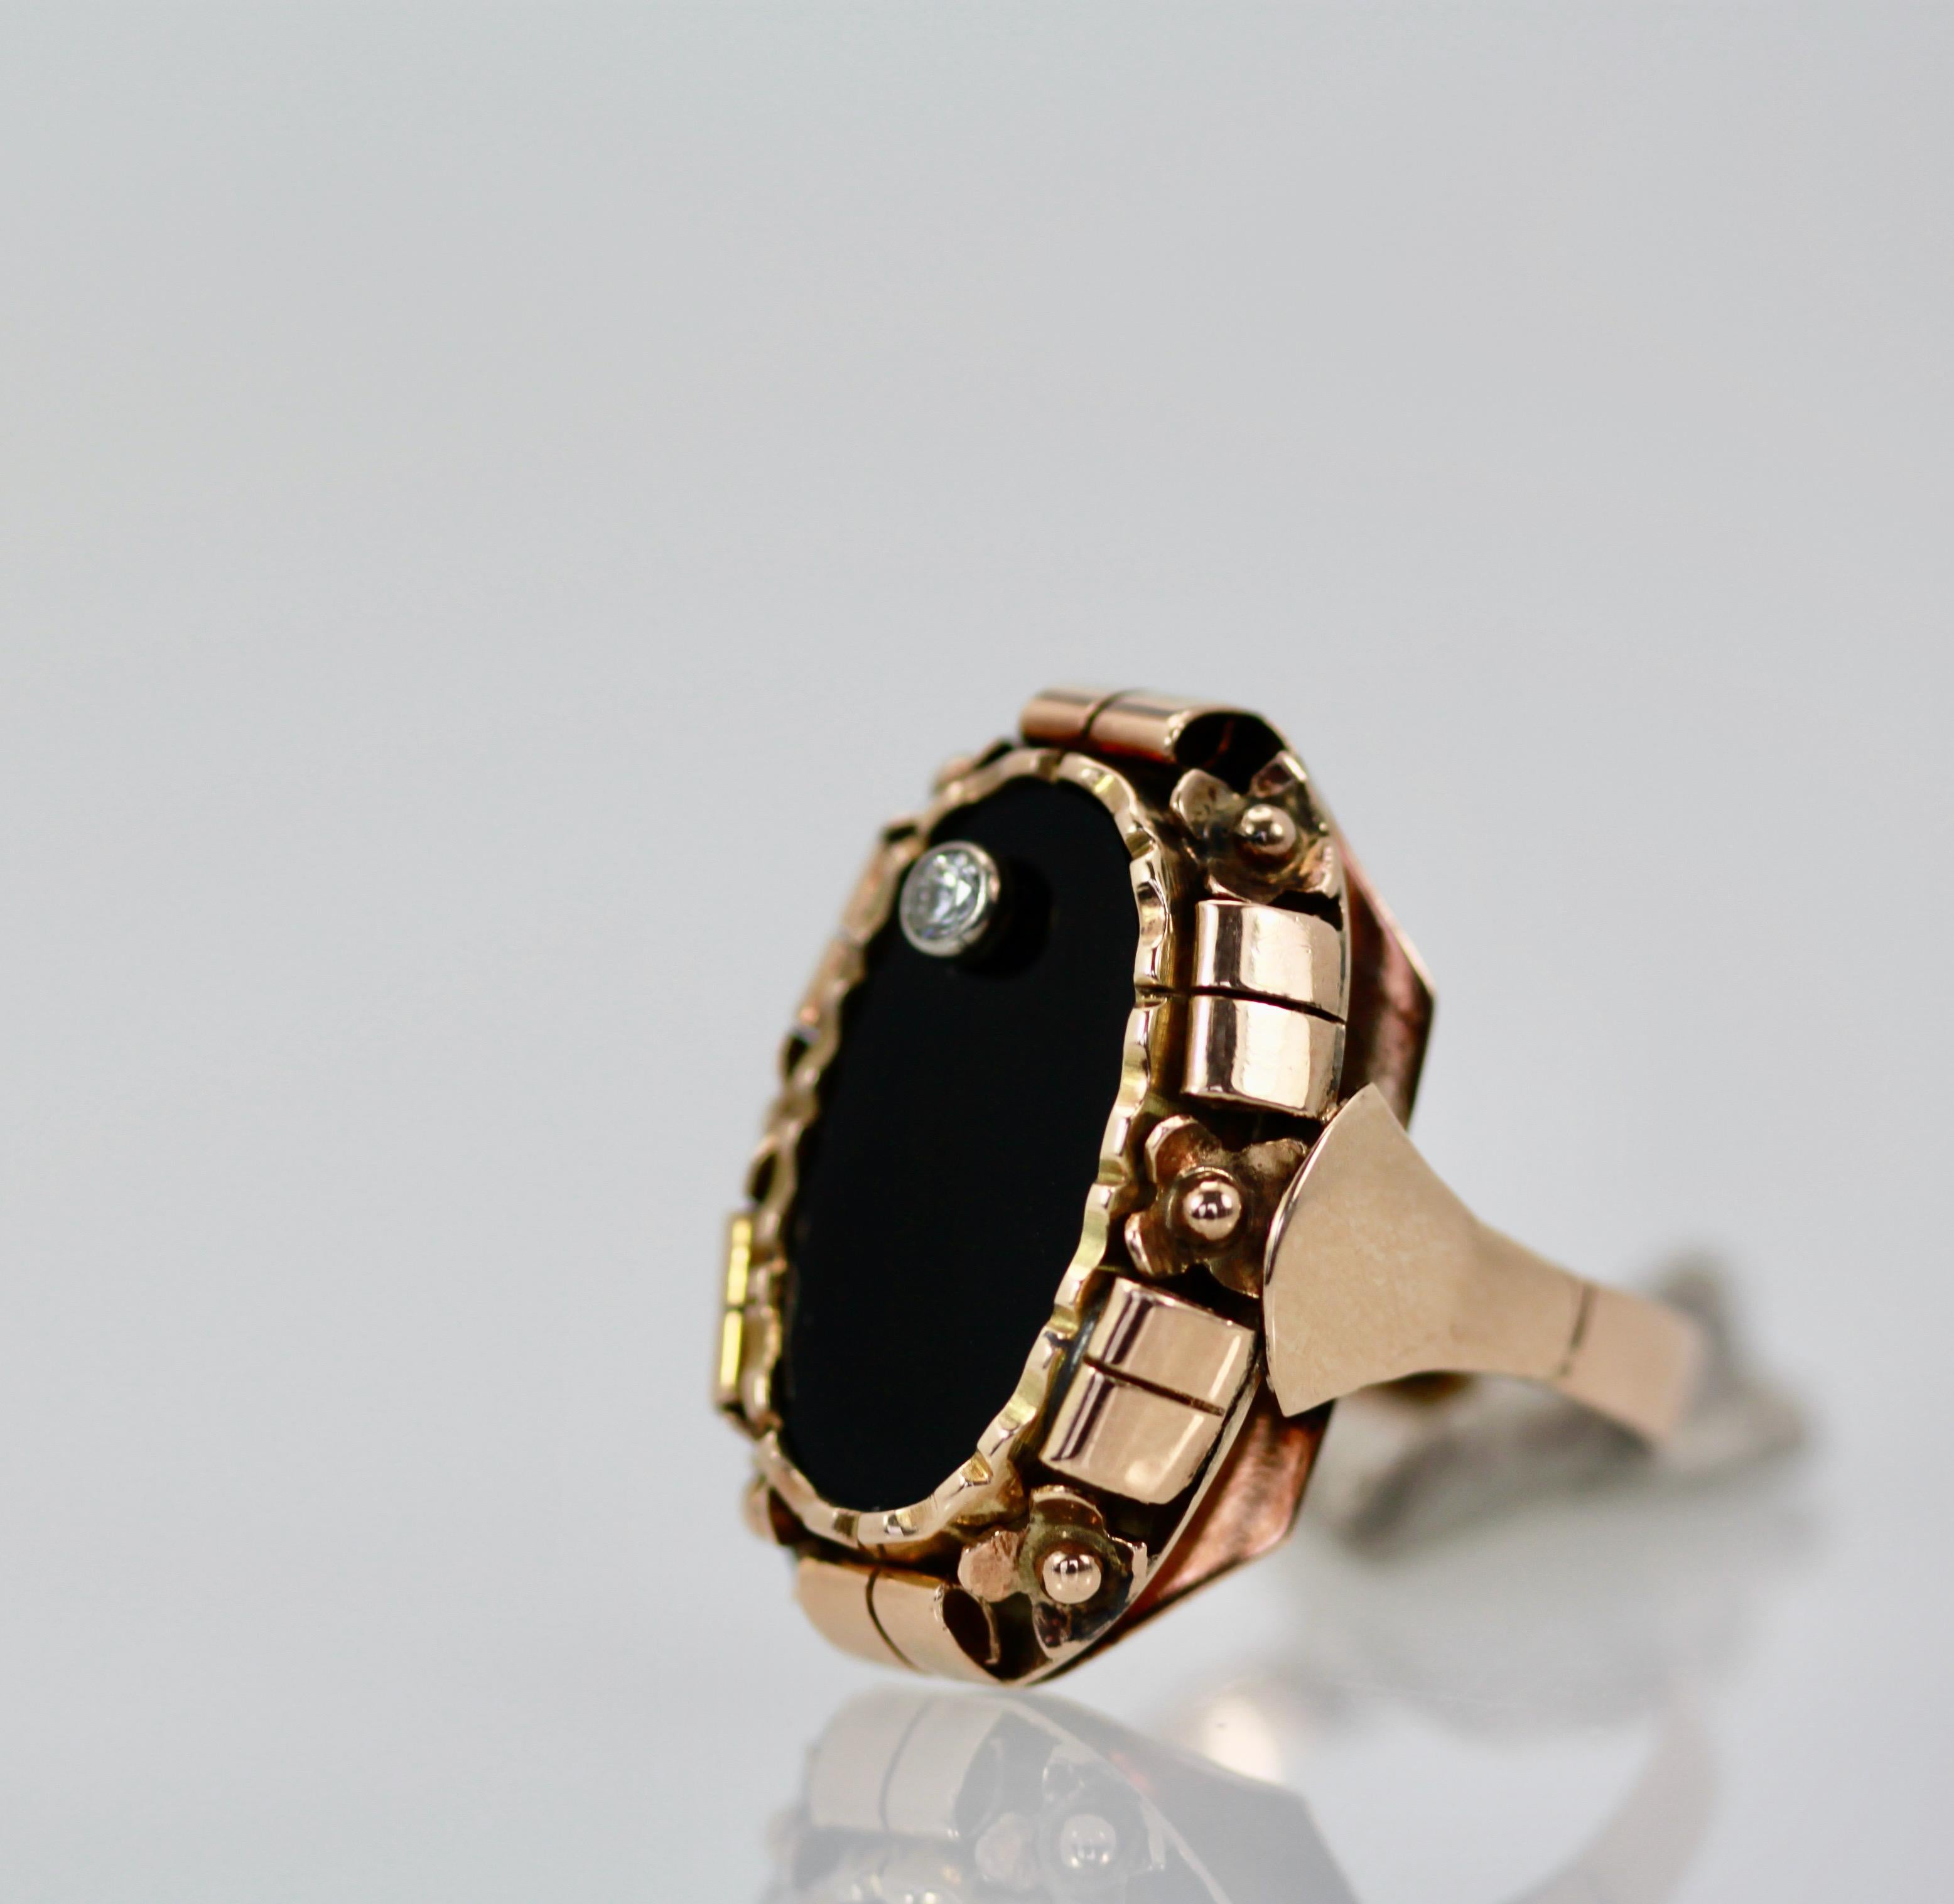 This awesome black onyx ring is set in 14K rose gold.  It is large and covers the finger quit nicely.  It has a small Diamond  set on the top of approximately 0.10 cts.  This ring is from the 1940's and is highly detailed and chase worked,  just